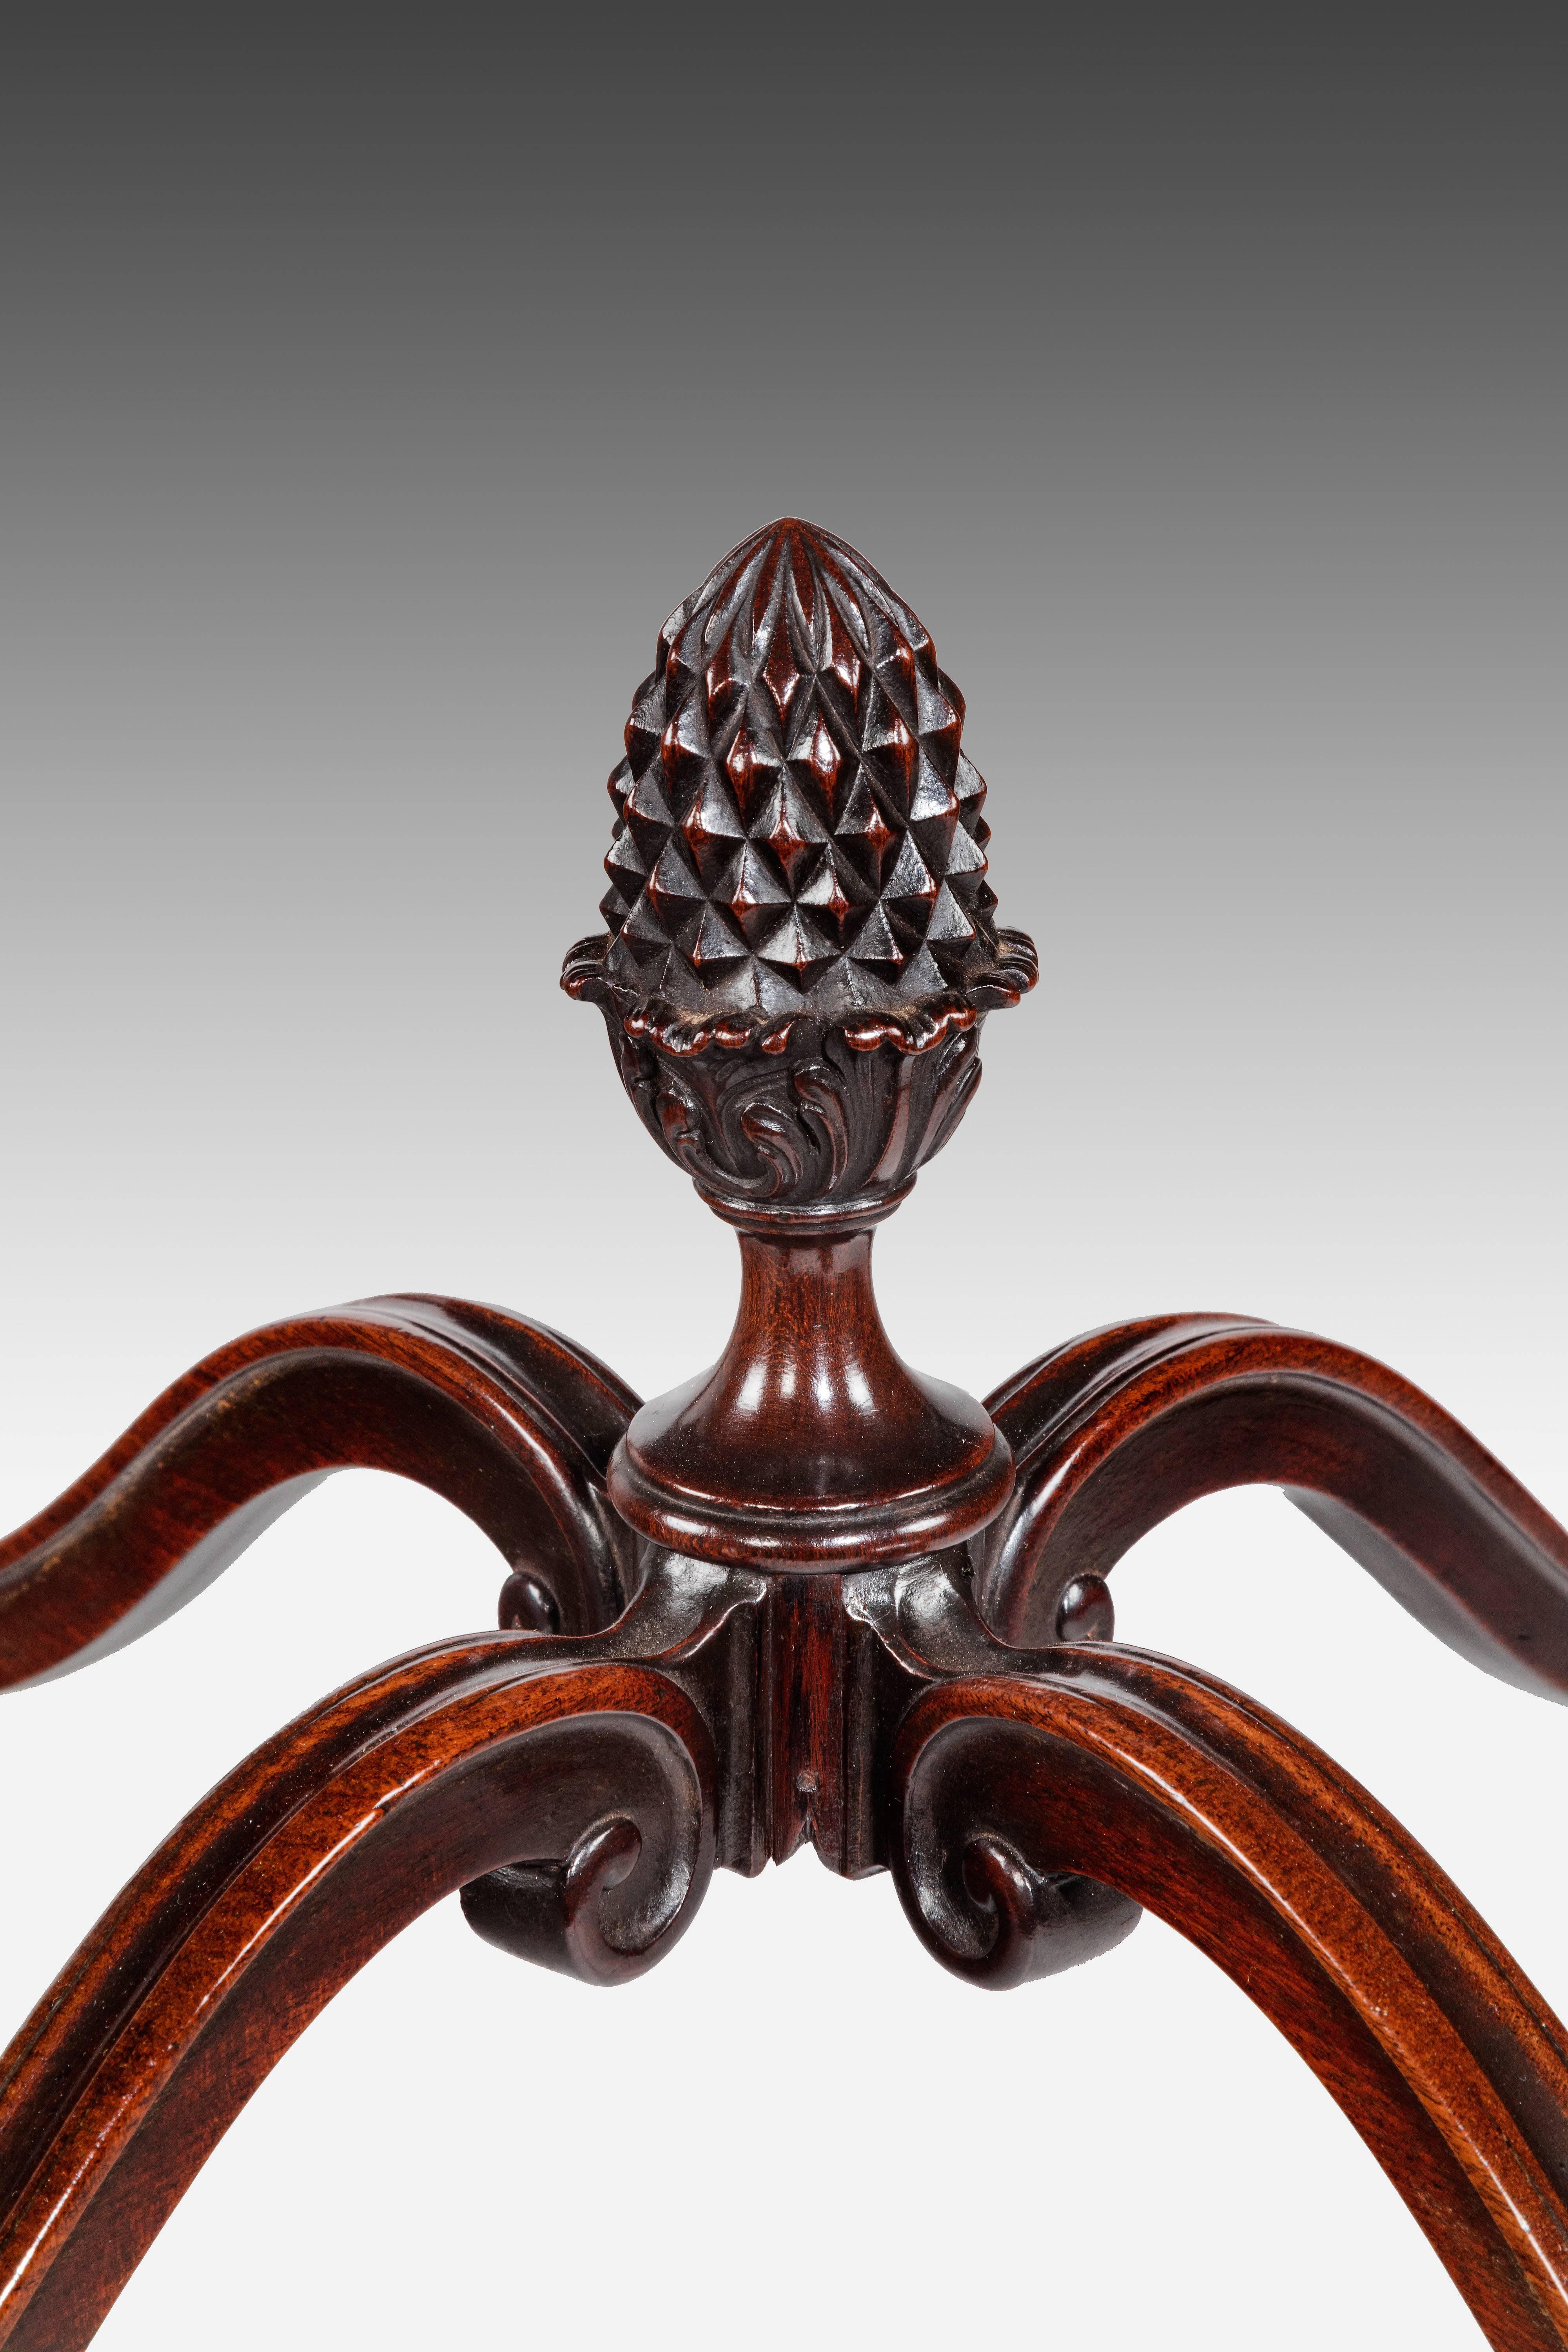 Depth (closed): 71cm (28 inches); Depth (open): 98cm (38.5 inches).

A George III mahogany Pembroke table with serpentine or butterfly-shaped leaves above a single end drawer with two original axe-head drop handles. Standing on carved cabriole